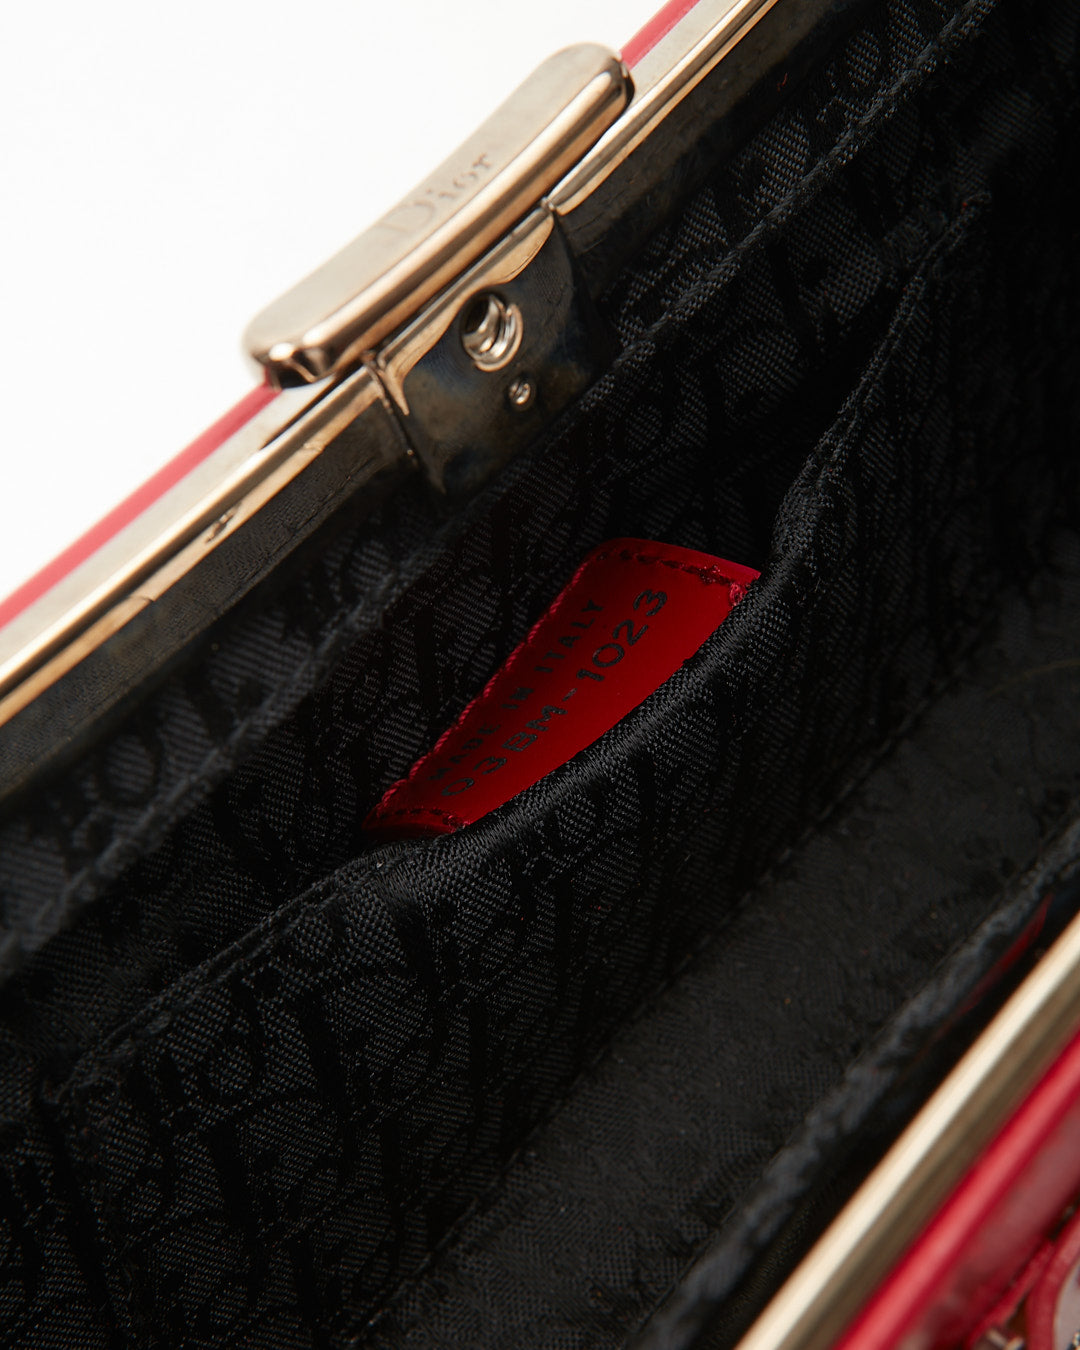 Dior Red Leather Bondage 2003 Long Clutch Chain Bag